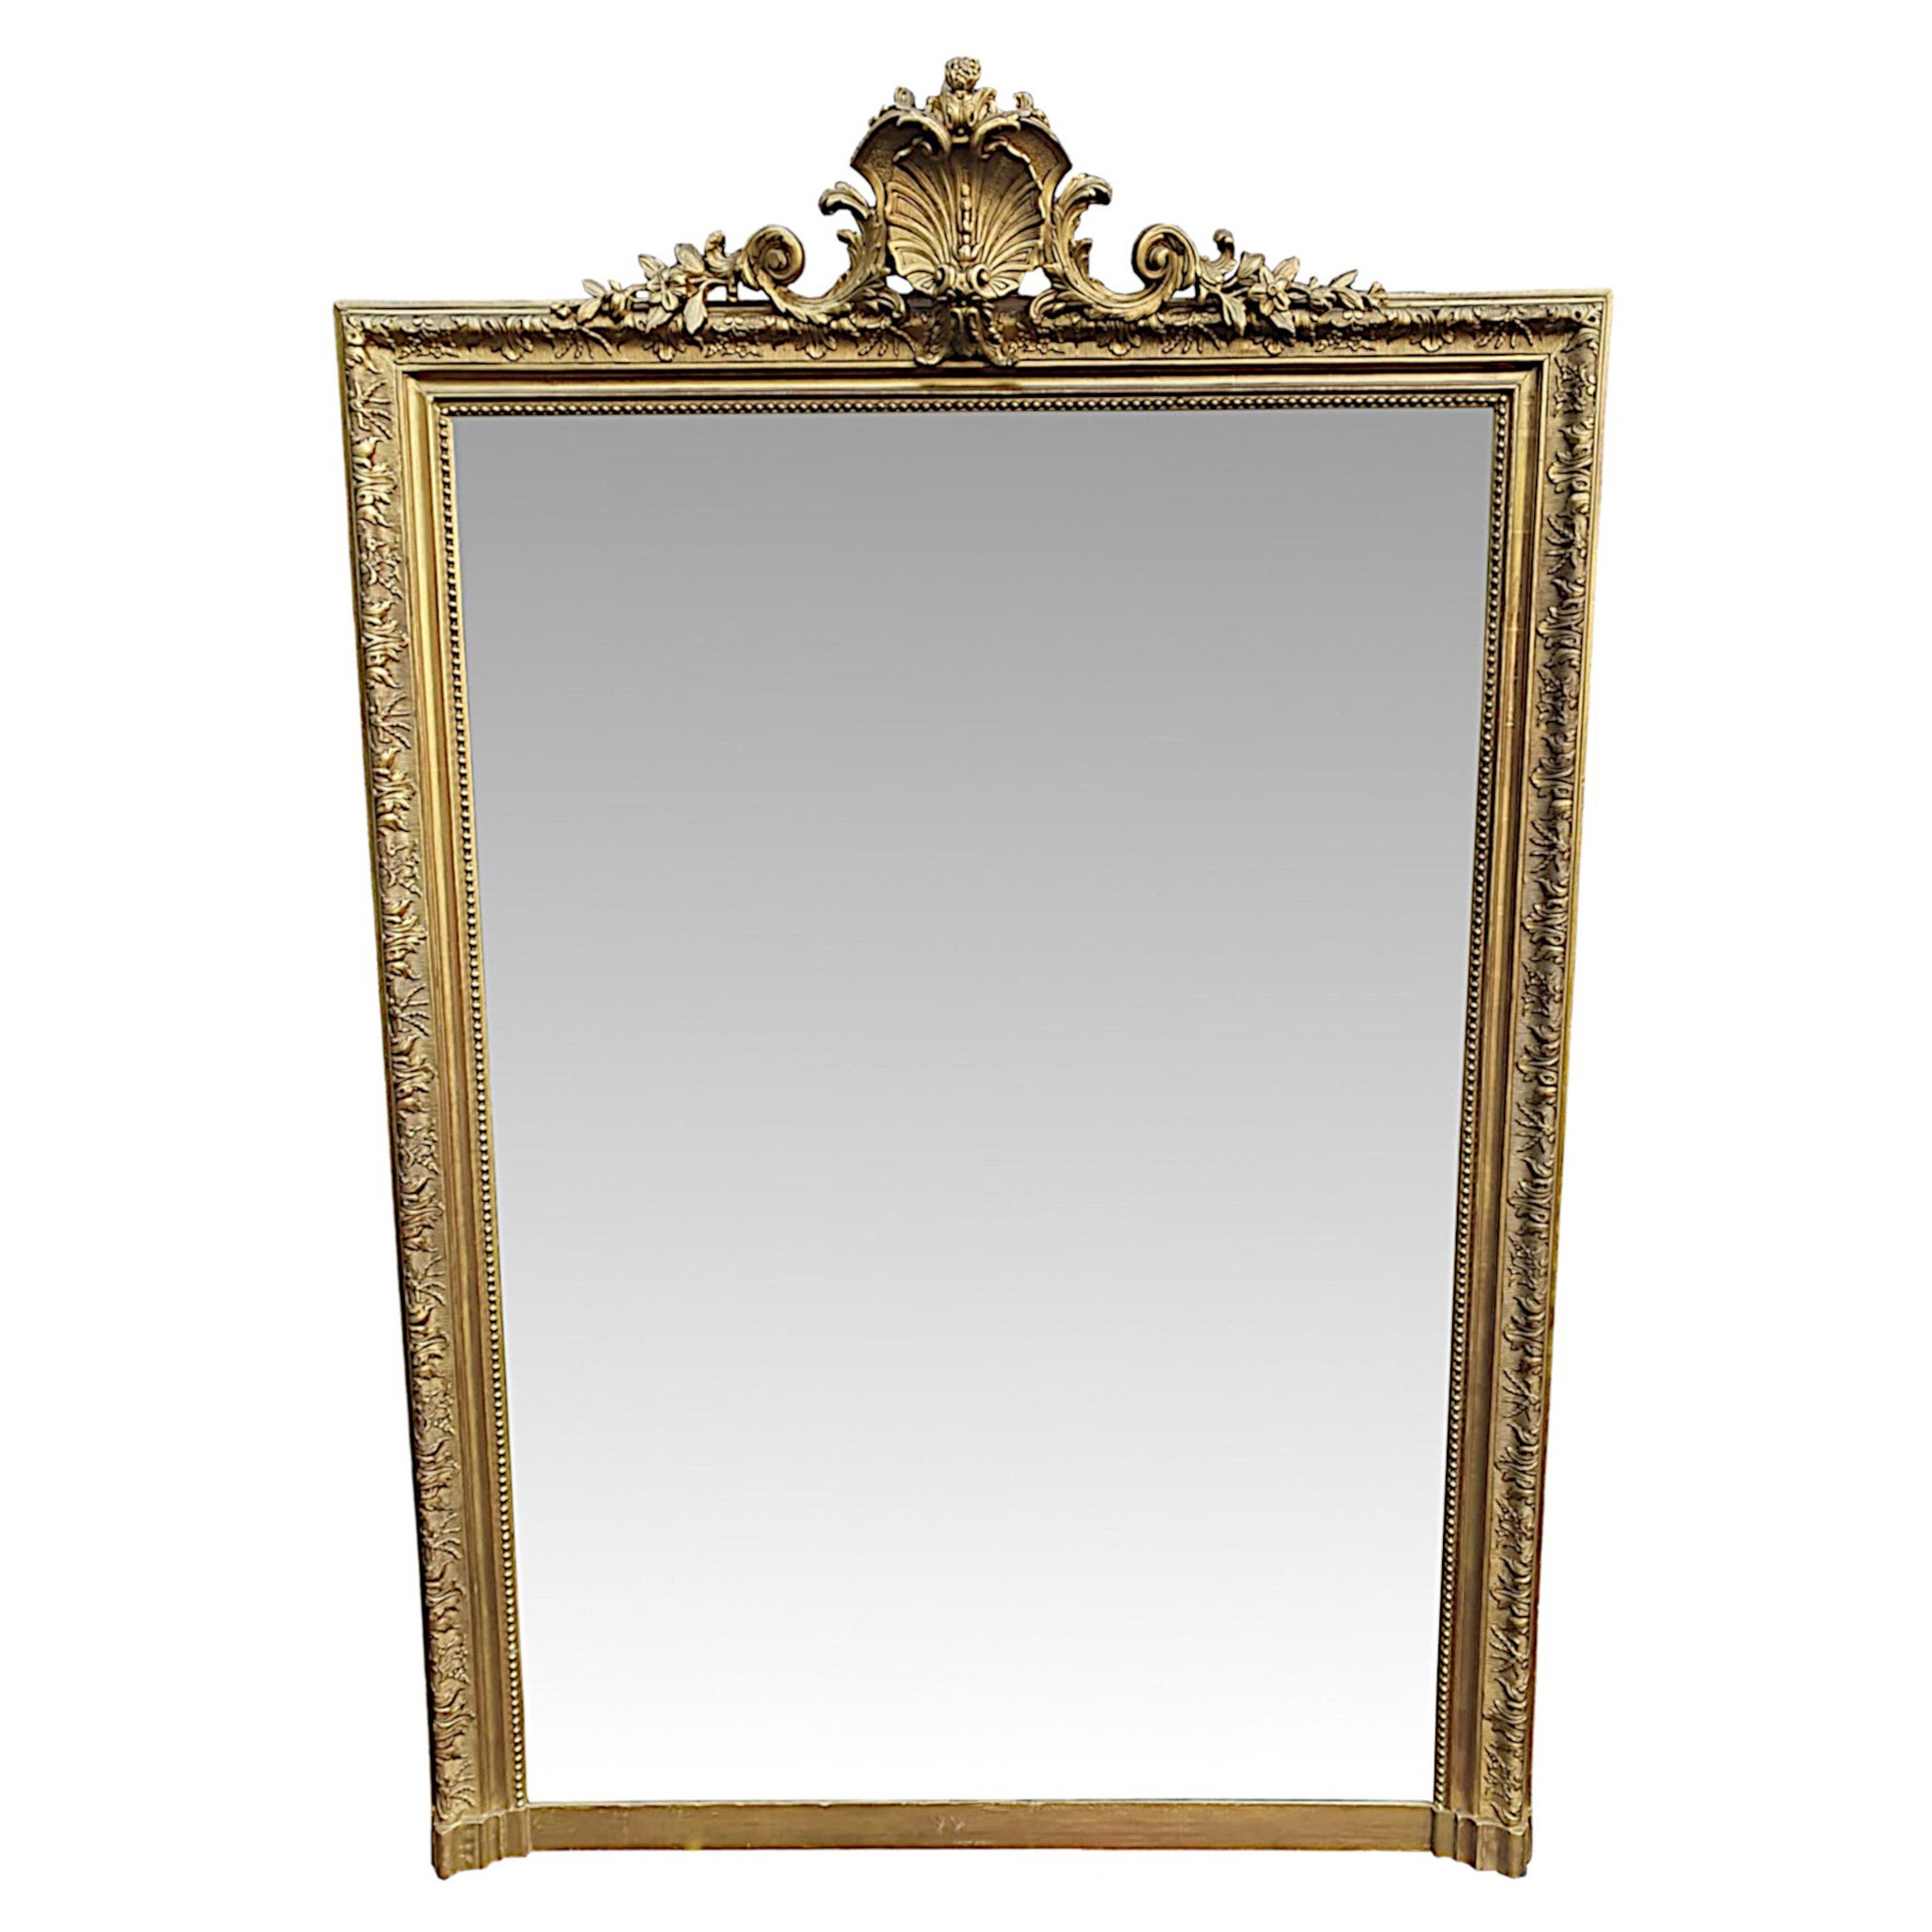 Very Fine 19th Century Giltwood Overmantle or Hall Mirror For Sale